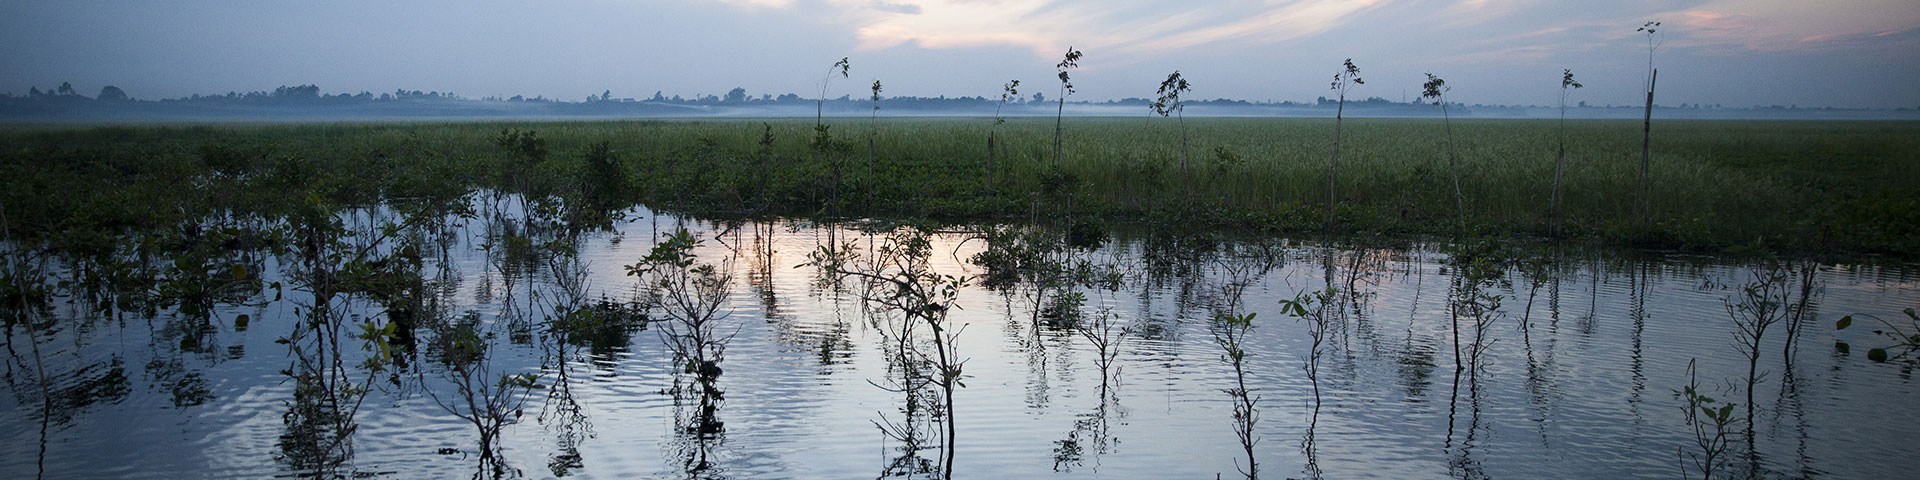 A serene marshland with lush, towering grass and calm water reflecting the beauty of nature.